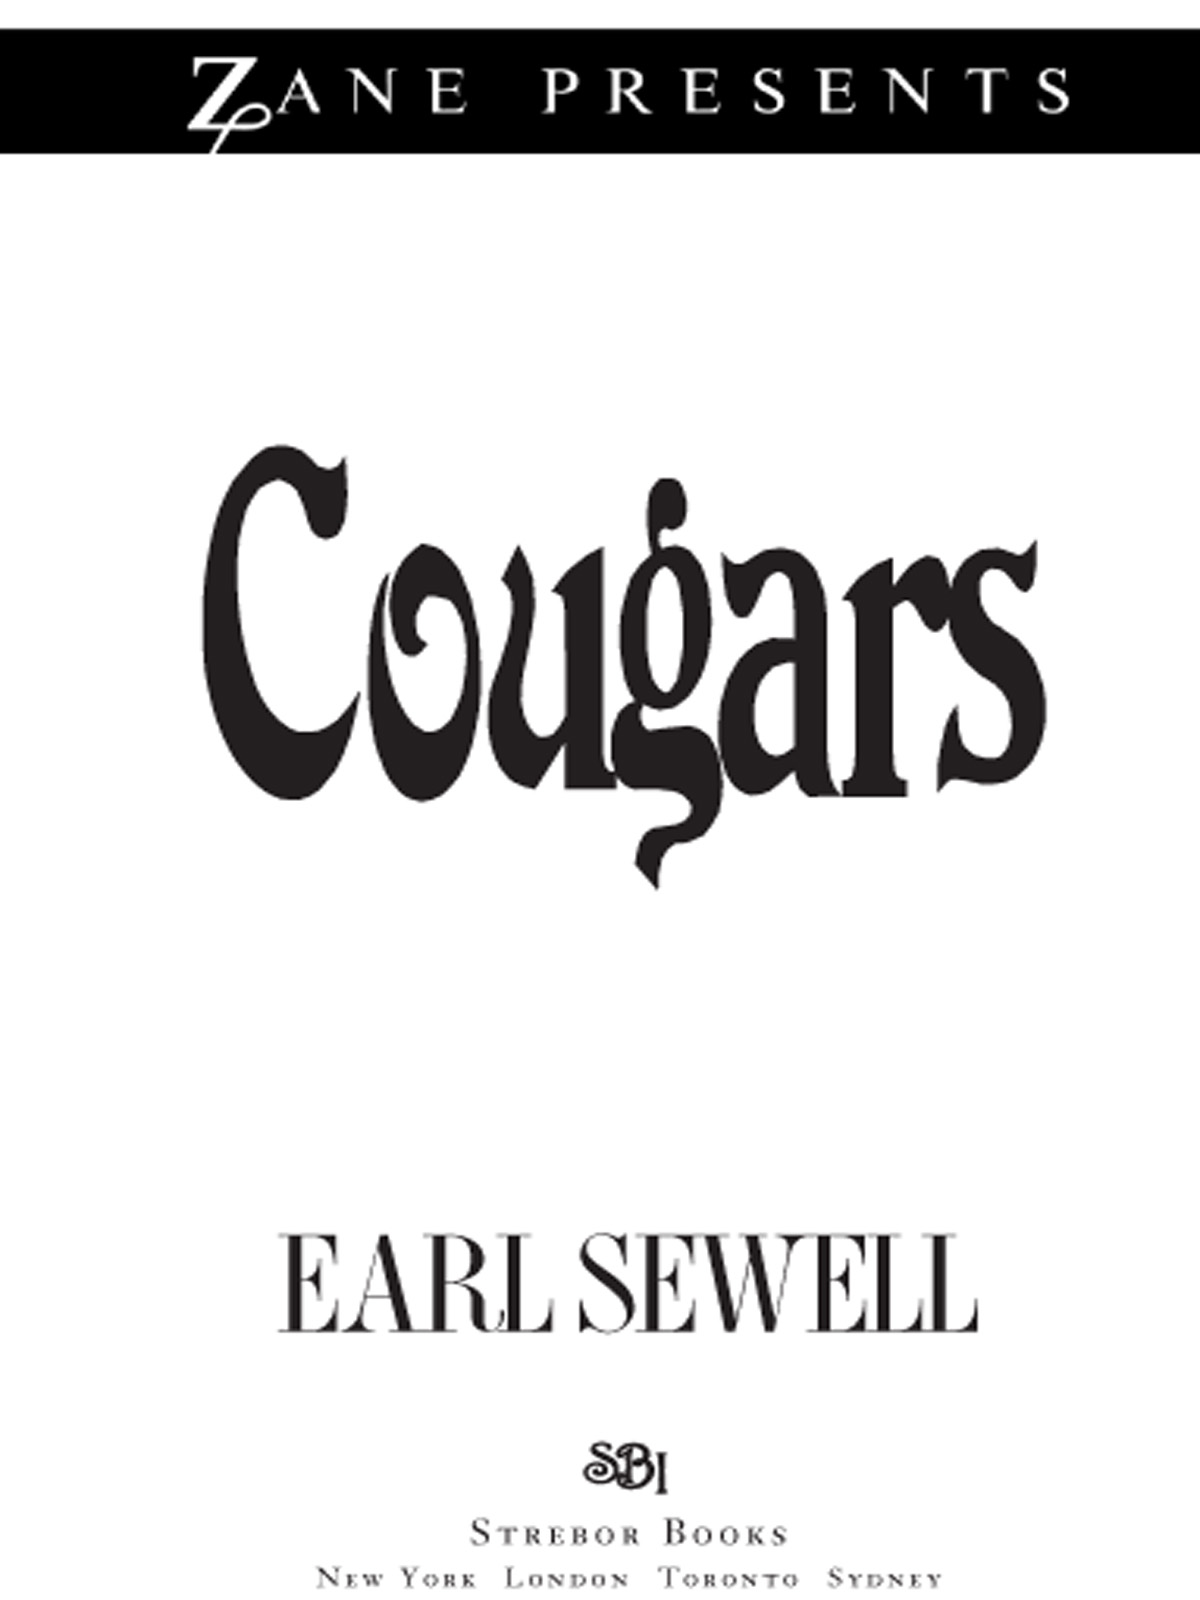 Cougars (2010)